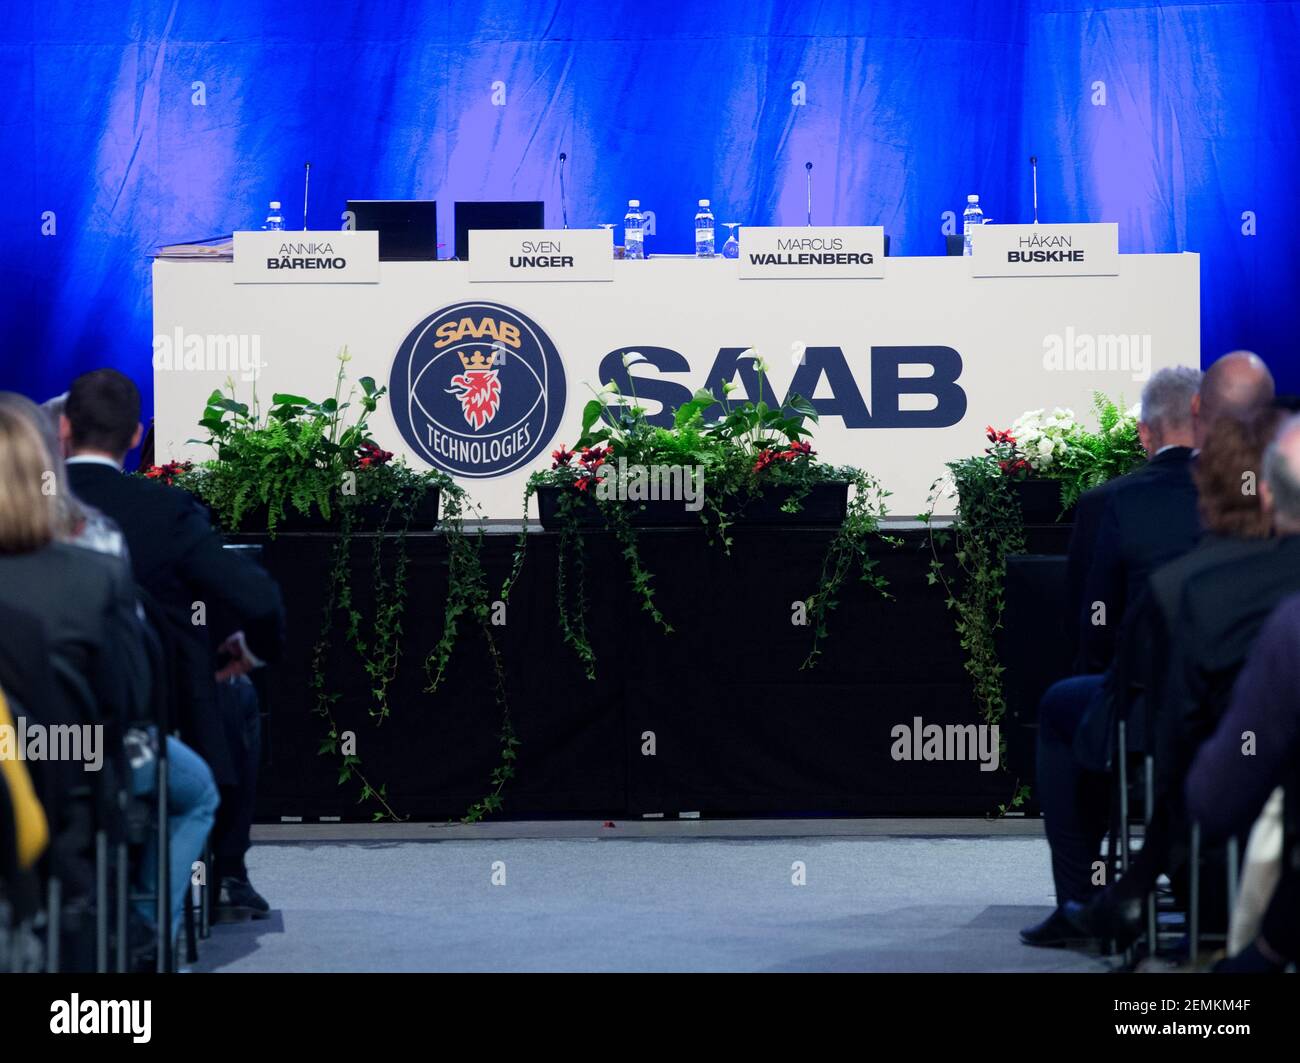 LINKÖPING, SWEDEN- 14 APRIL 2016:Saab AB held an Annual General Meeting for shareholders in Saab's hangar, Tannefors. Stock Photo